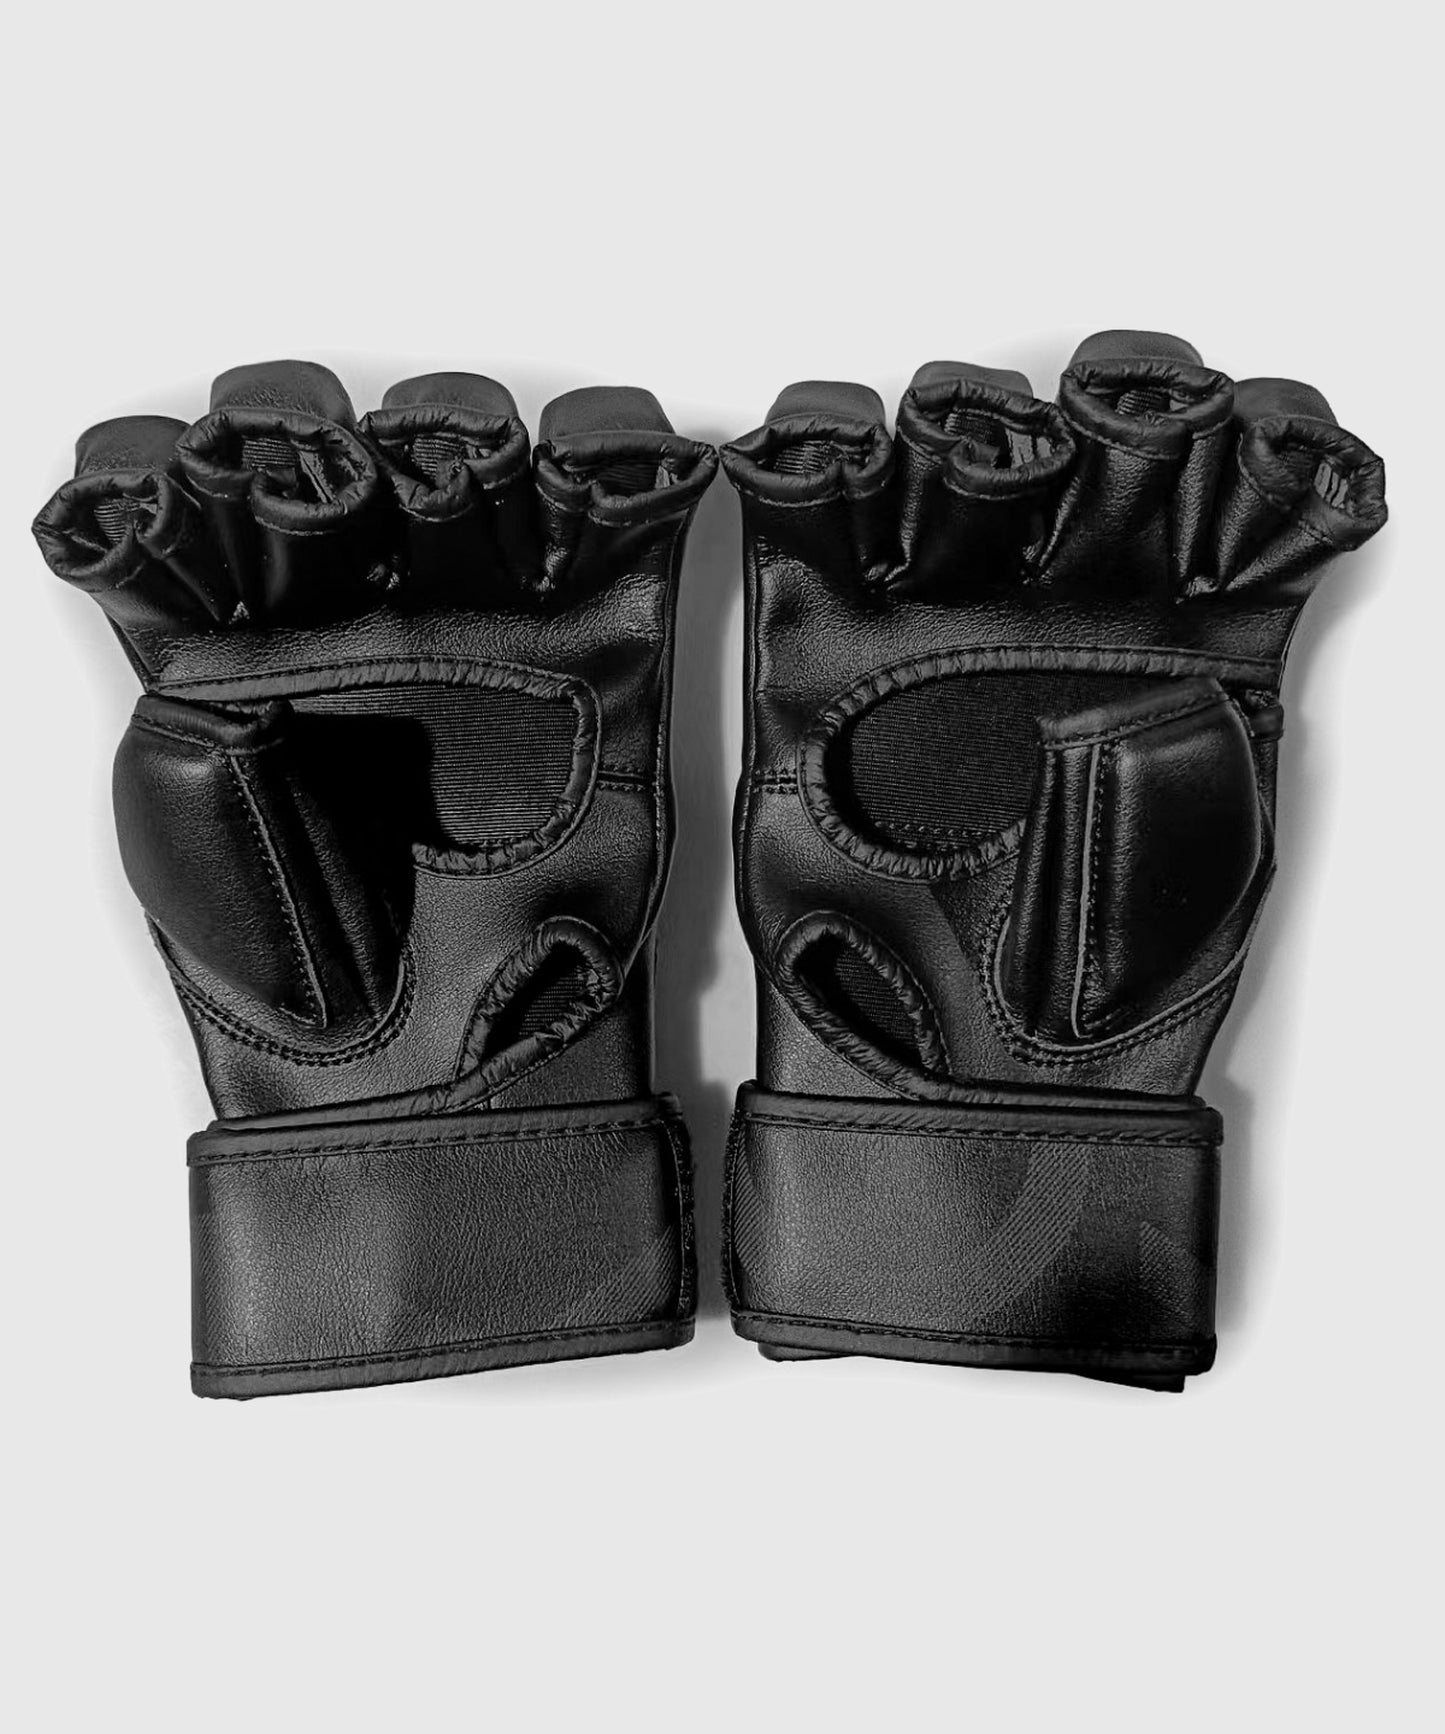 Gants De Competition Mma Wicked One Right